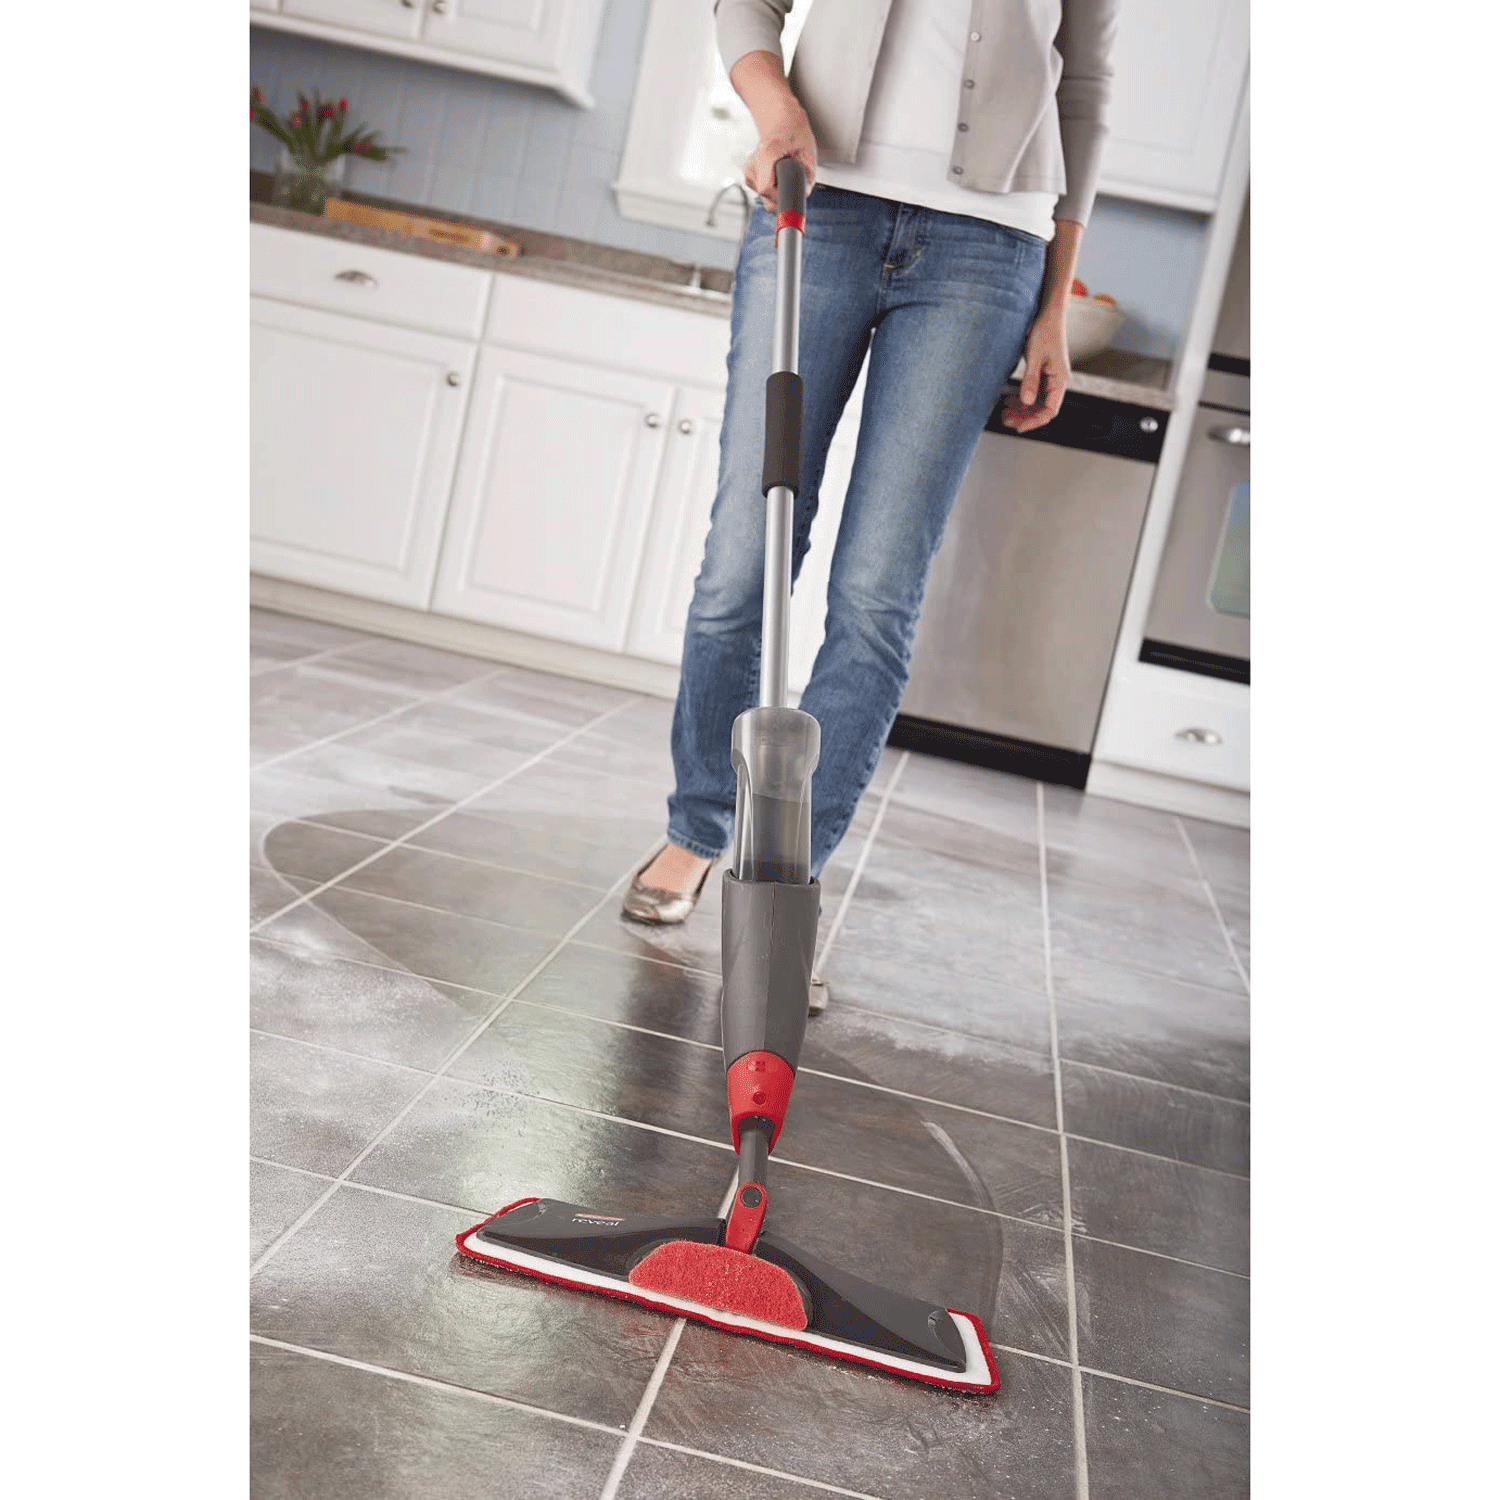 Hometimes 6 Packs Spray Mop Refills For Rubbermaid Reveal, Floor Mop  Washable Microfiber Cleaning Pads, Dry Wet Dual-use Replacement Mop Heads